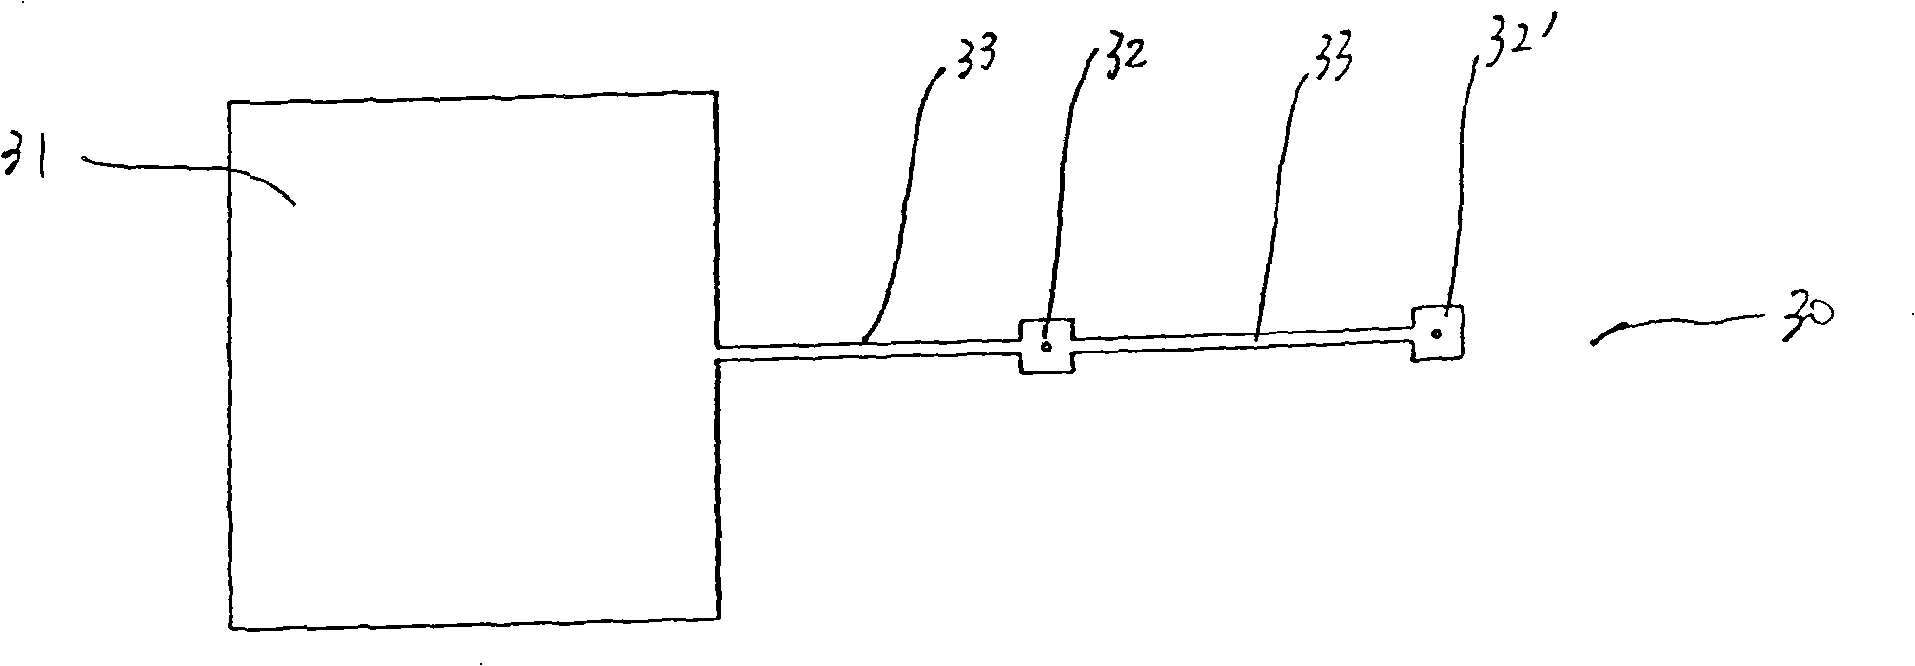 Micro-miniature terminal antenna based on composite right/left-handed transmission line